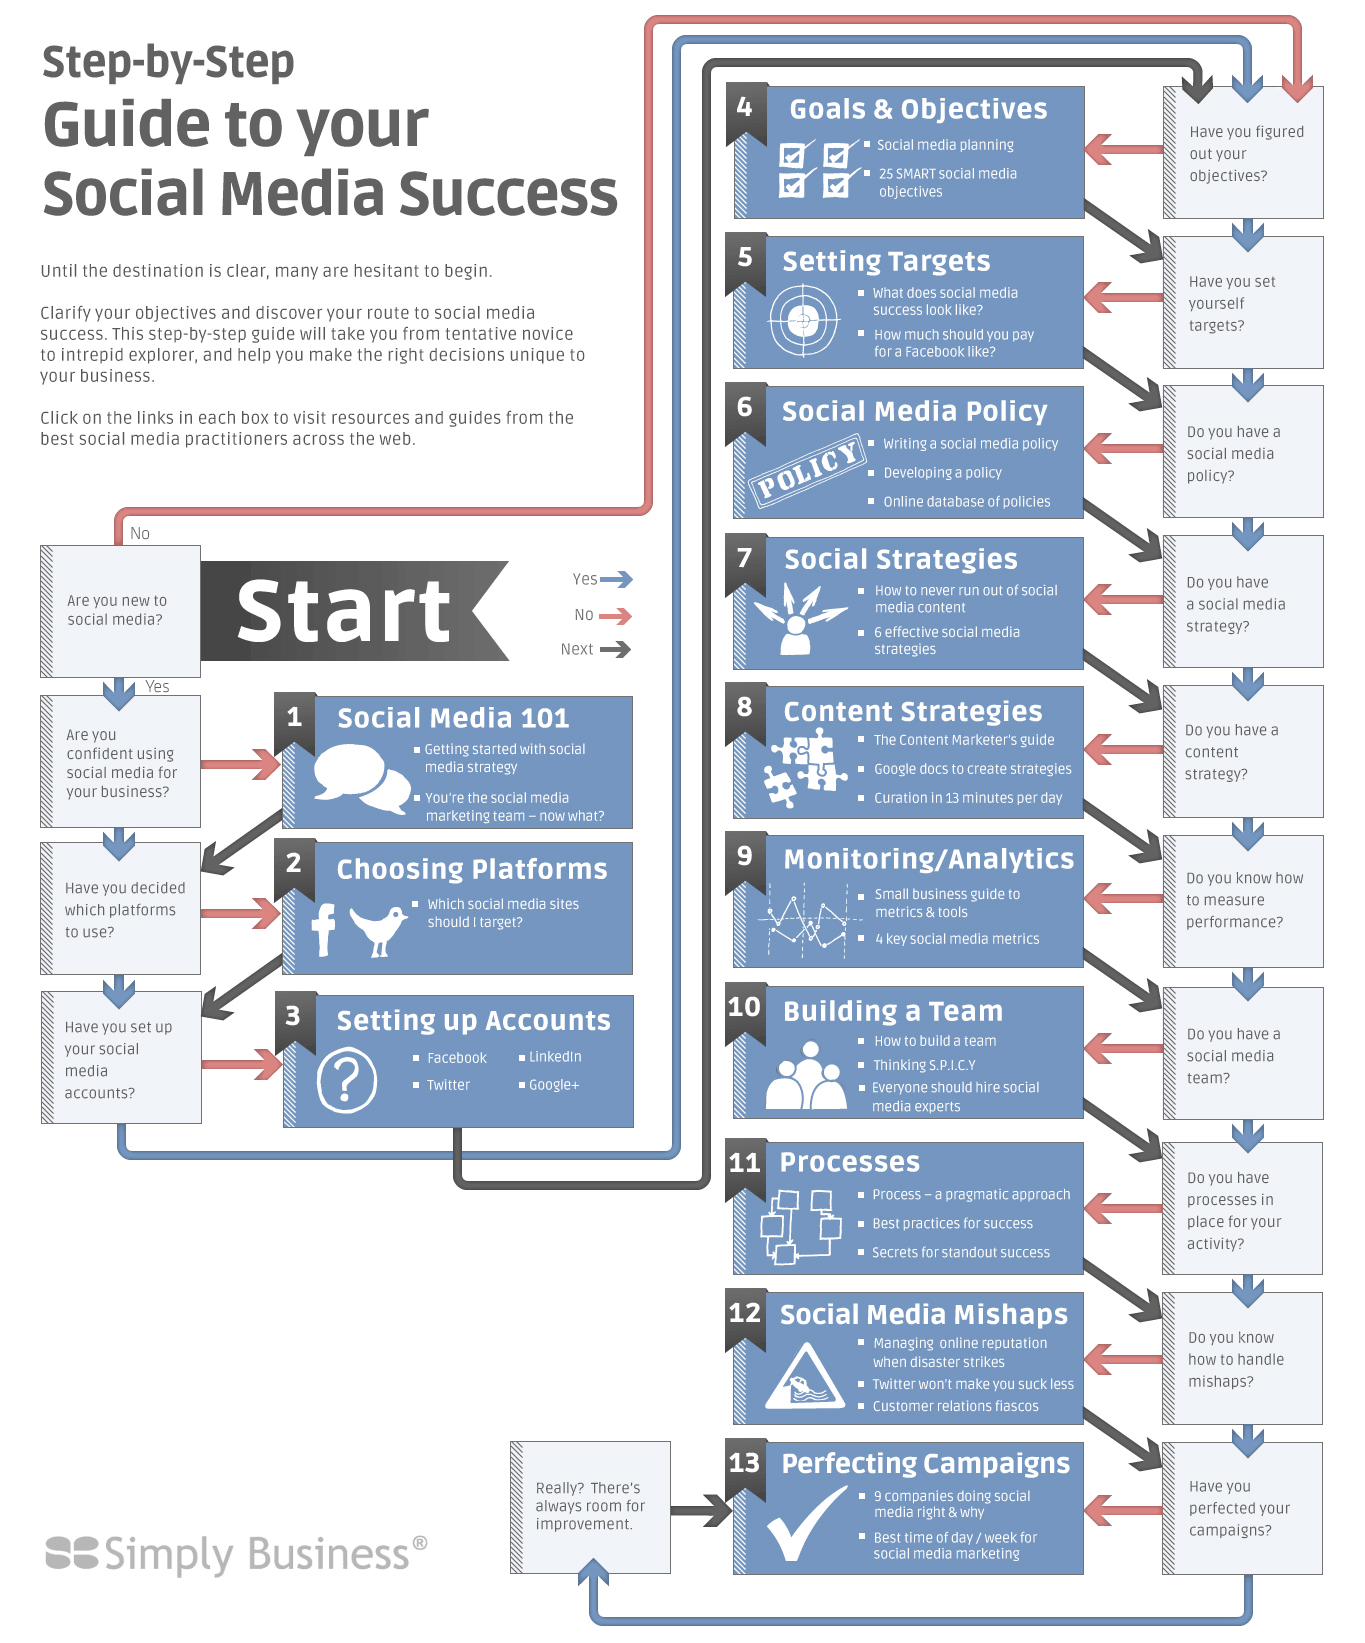 Step-By-Step Guide to Social Media Success